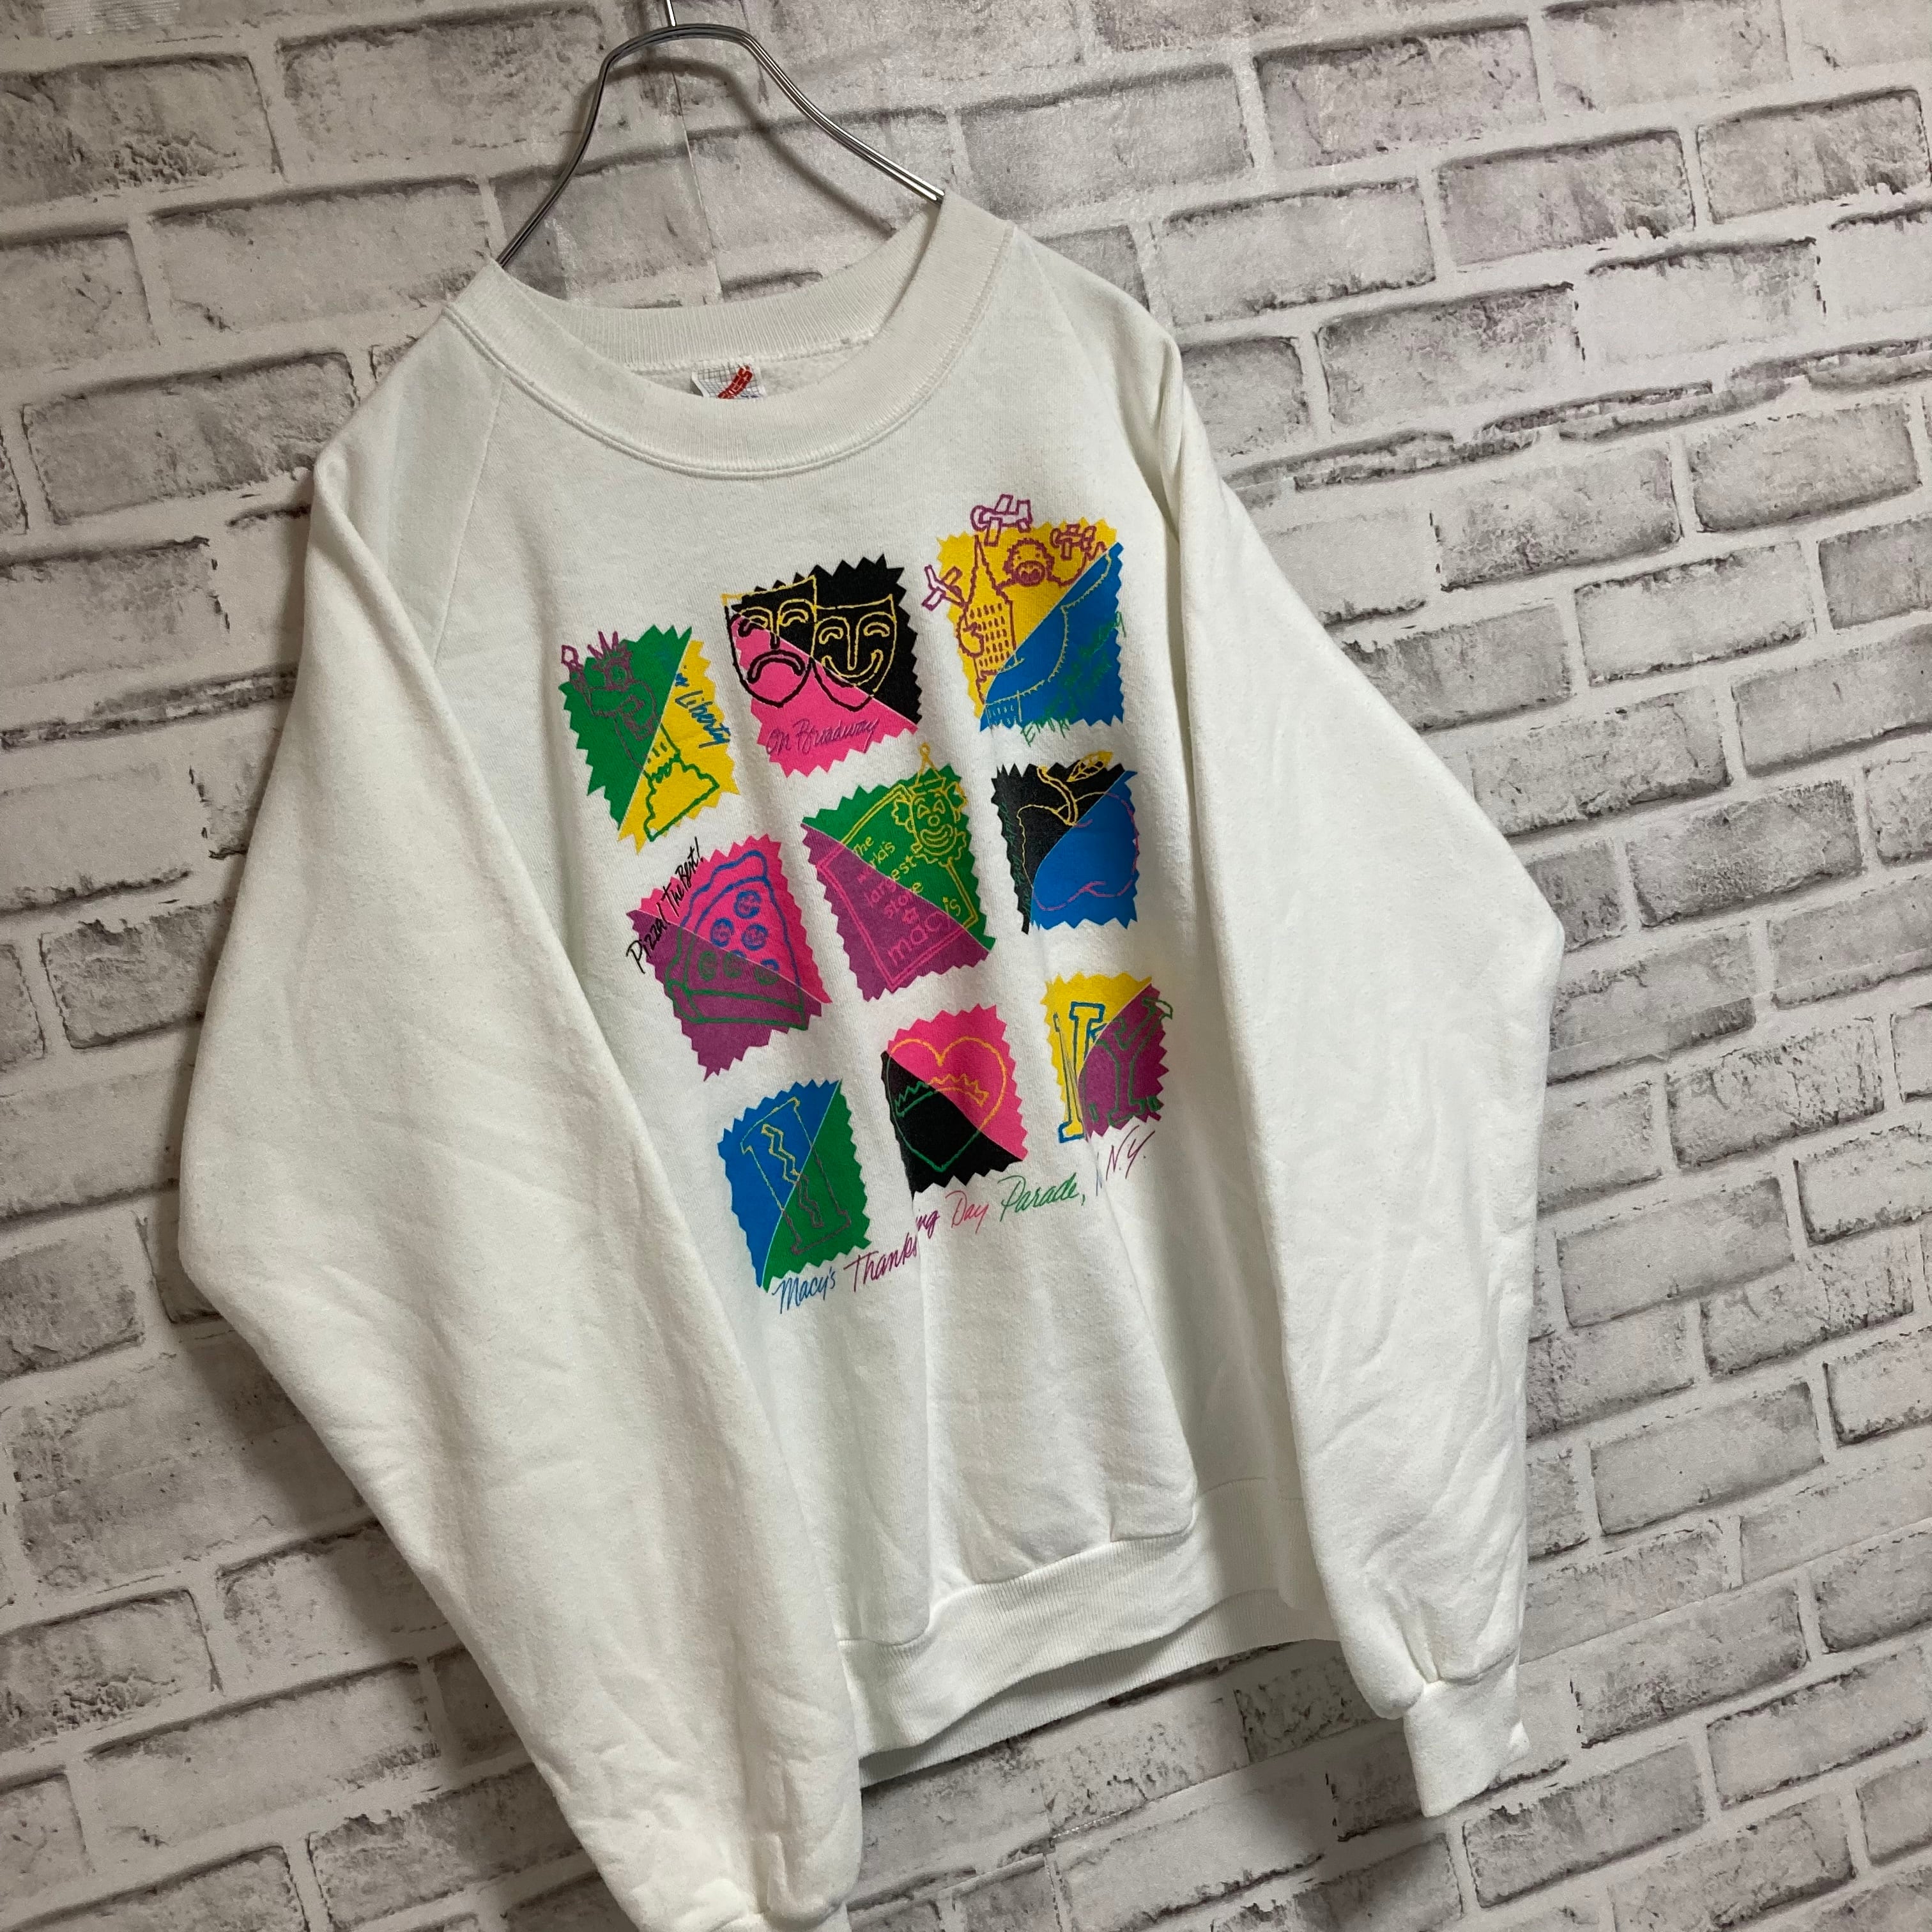 JERZEES】L/S Sweat L 80s Made in USA “NEW YORK ” スーベニア アート ...